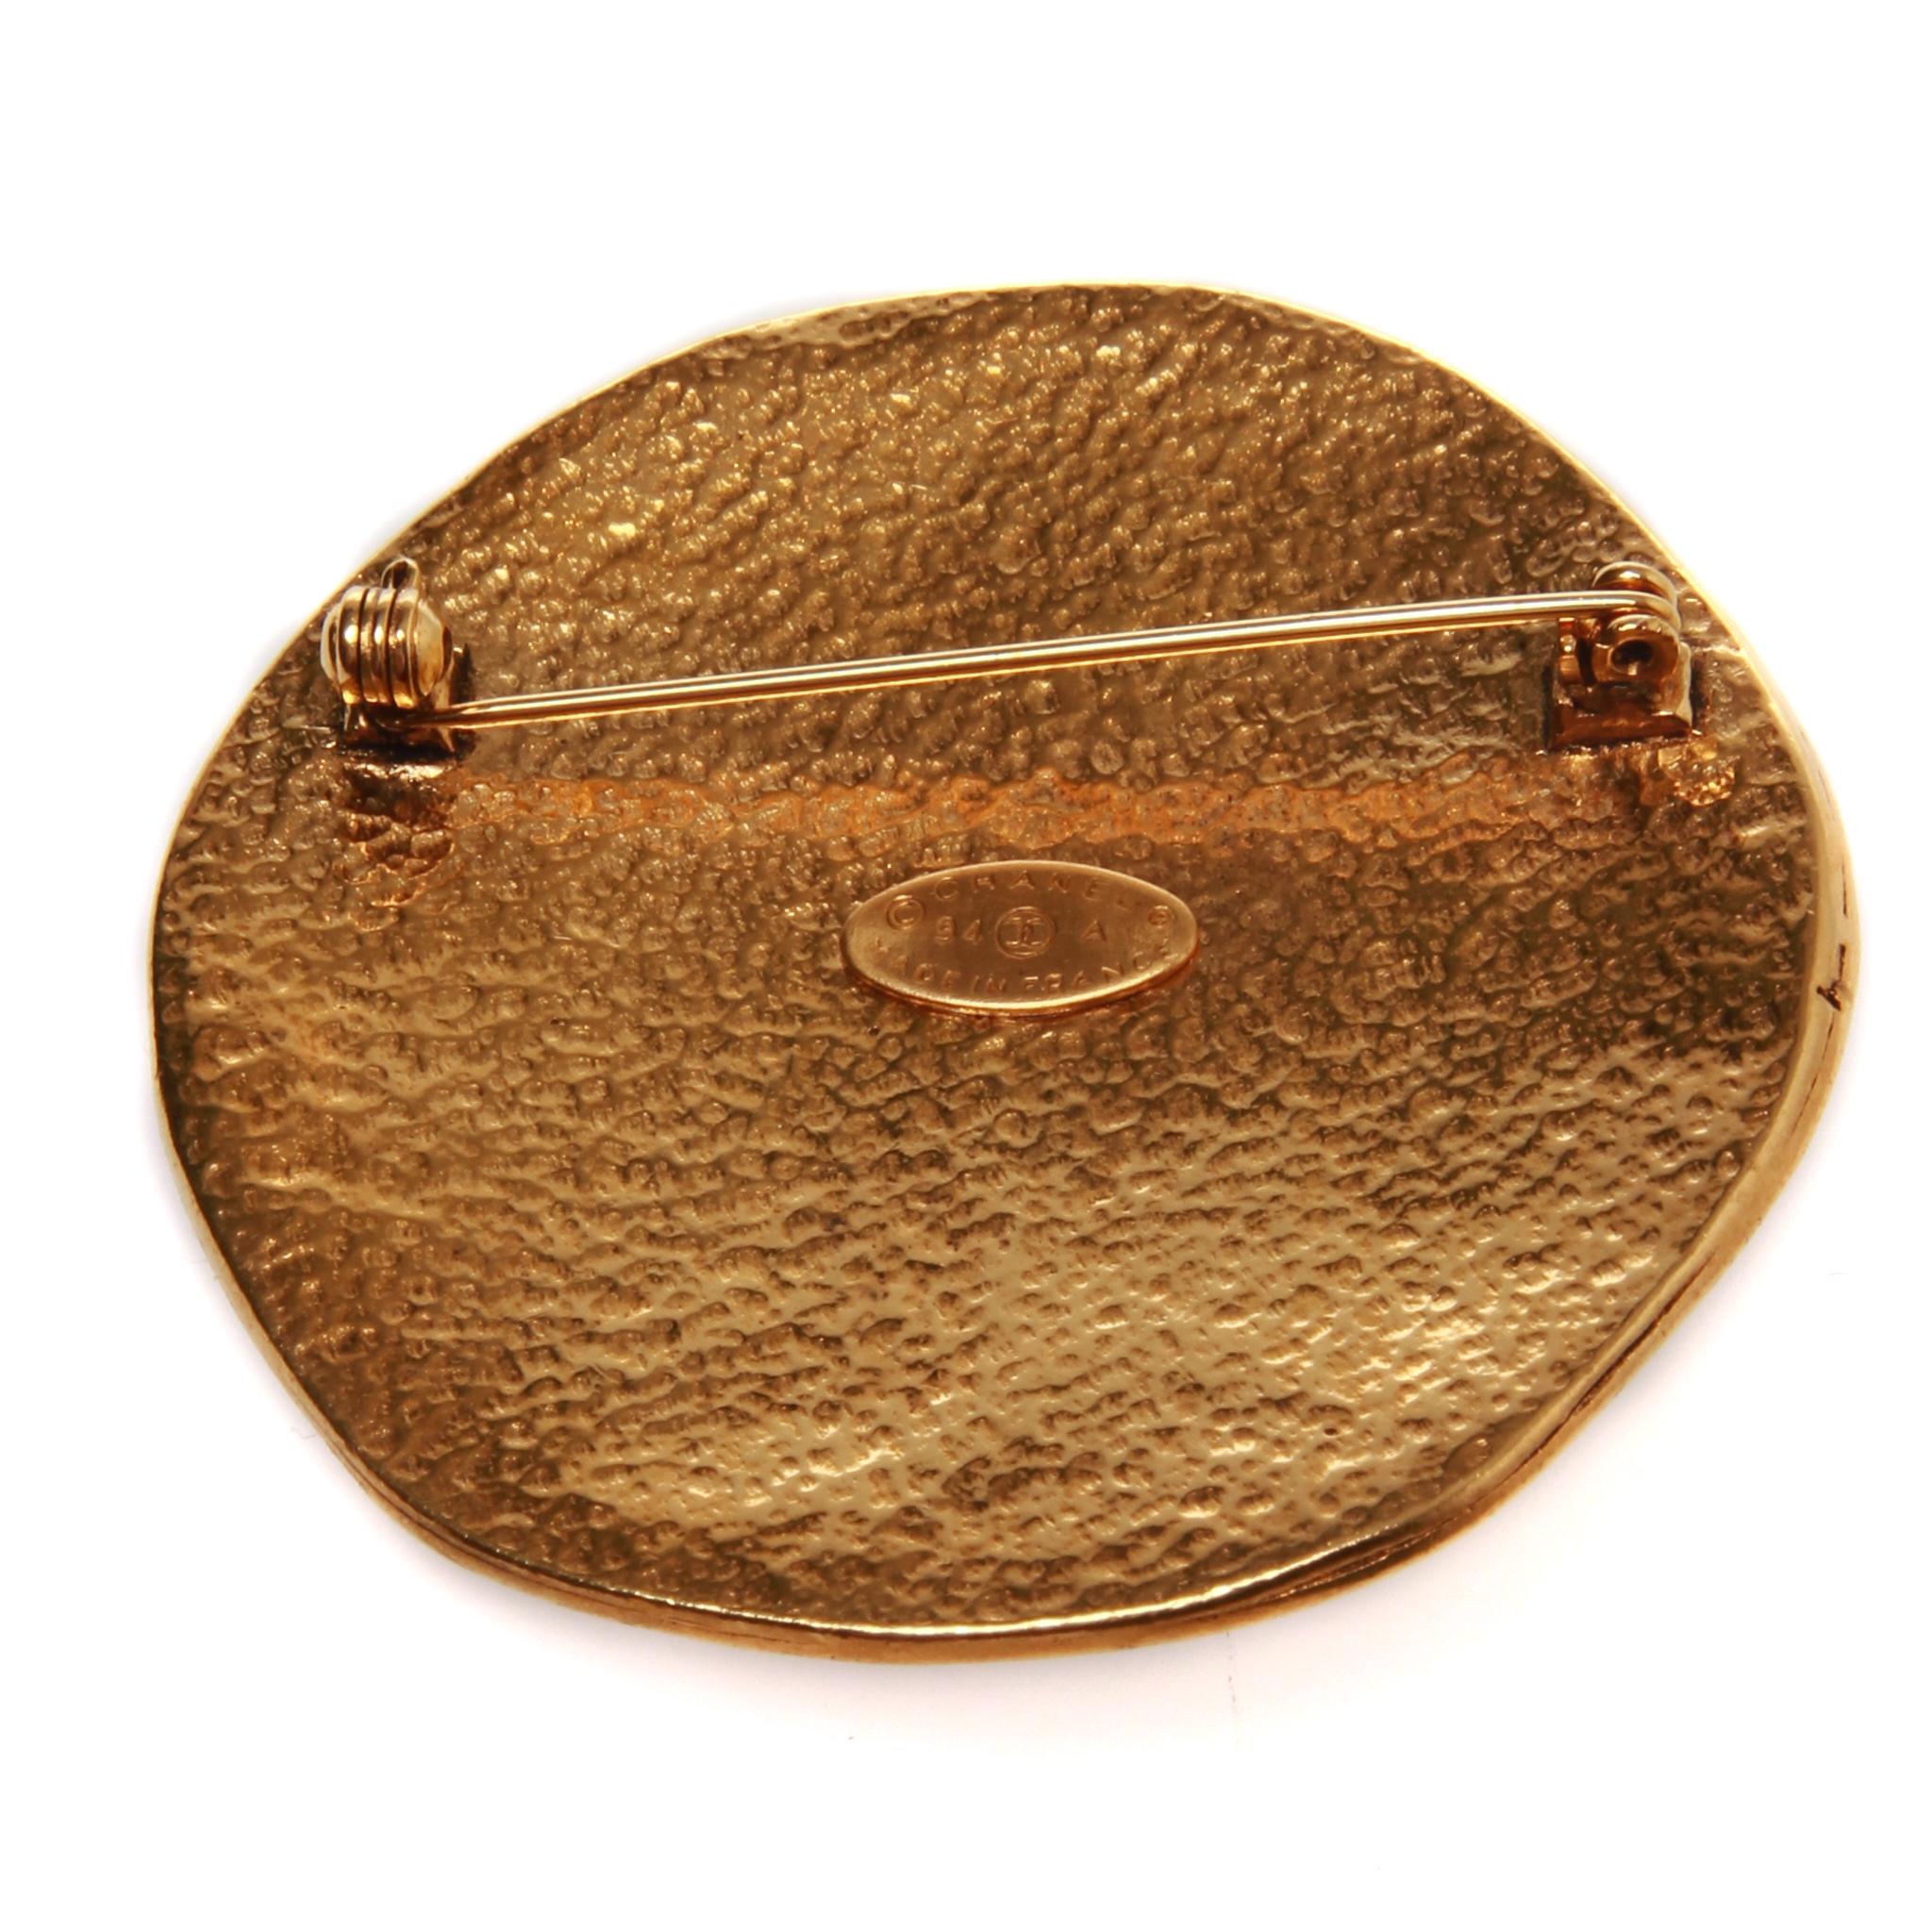 Chanel gold sun brooch with double CC, includes authentic Chanel box 